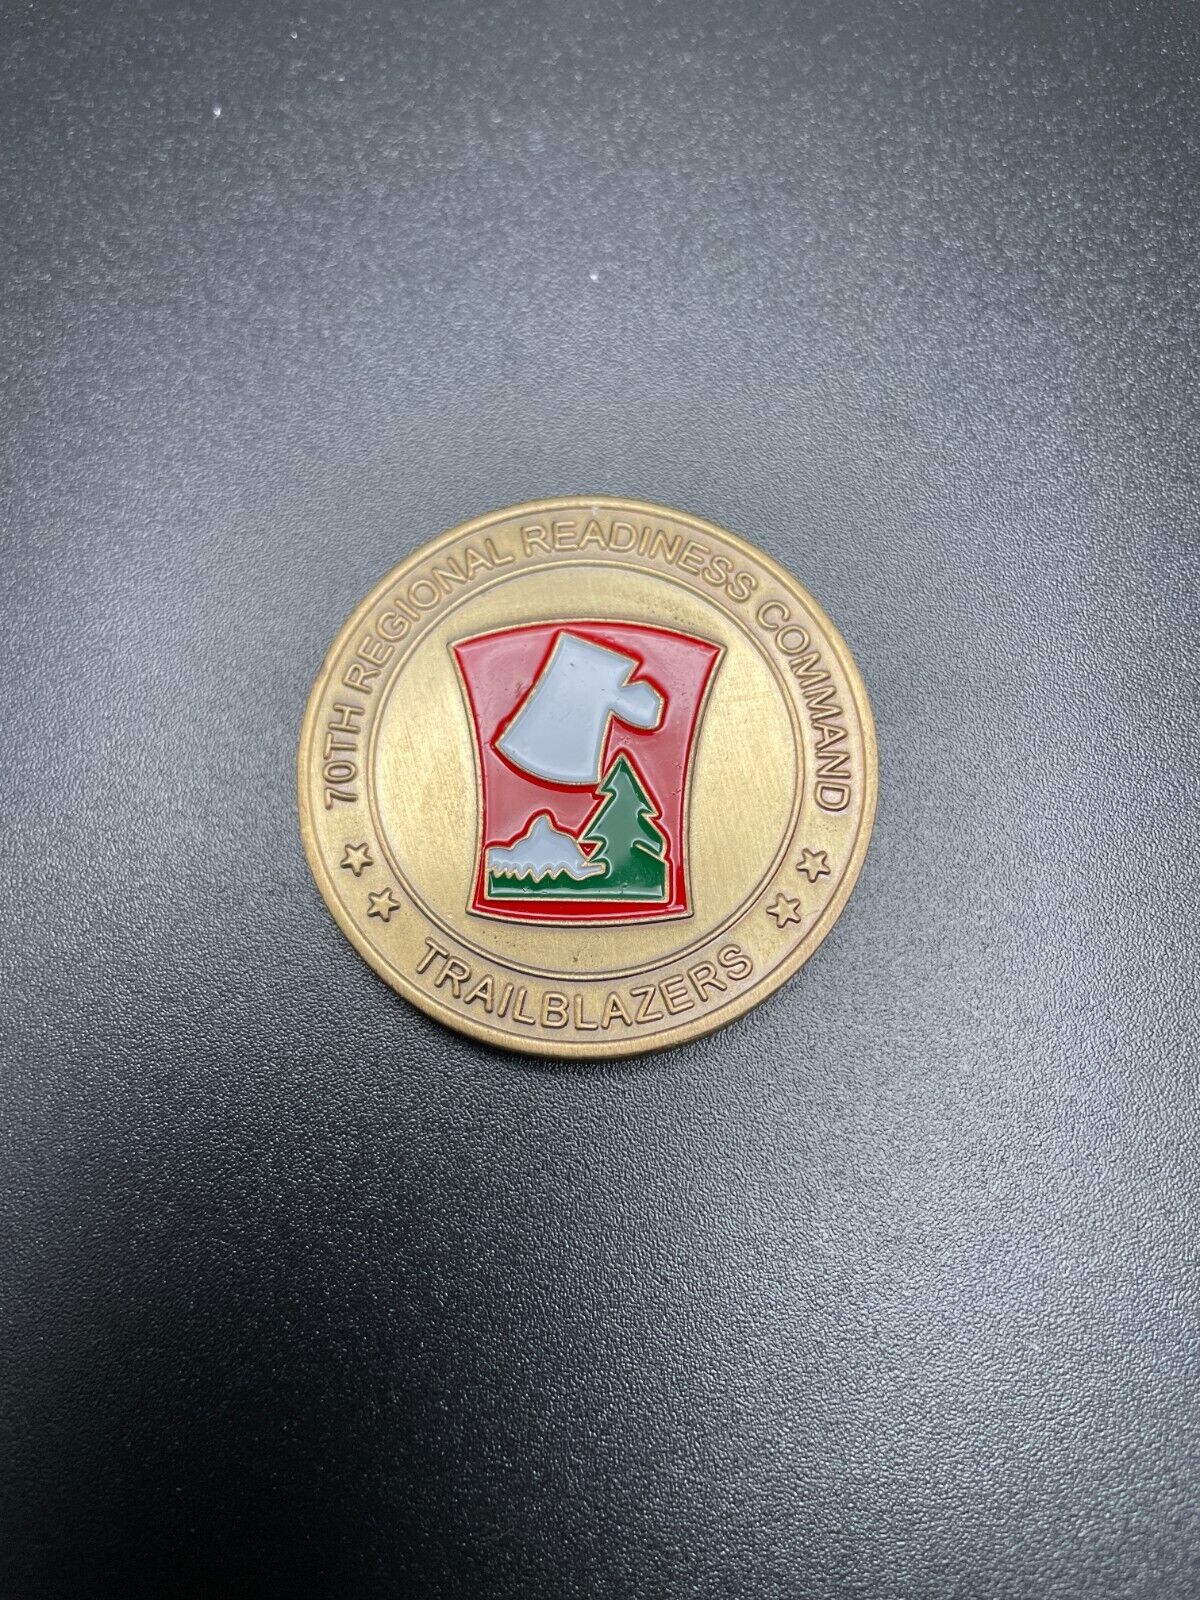 70th Regional Support Command Trailblazers - Personal Excellence Challenge Coin